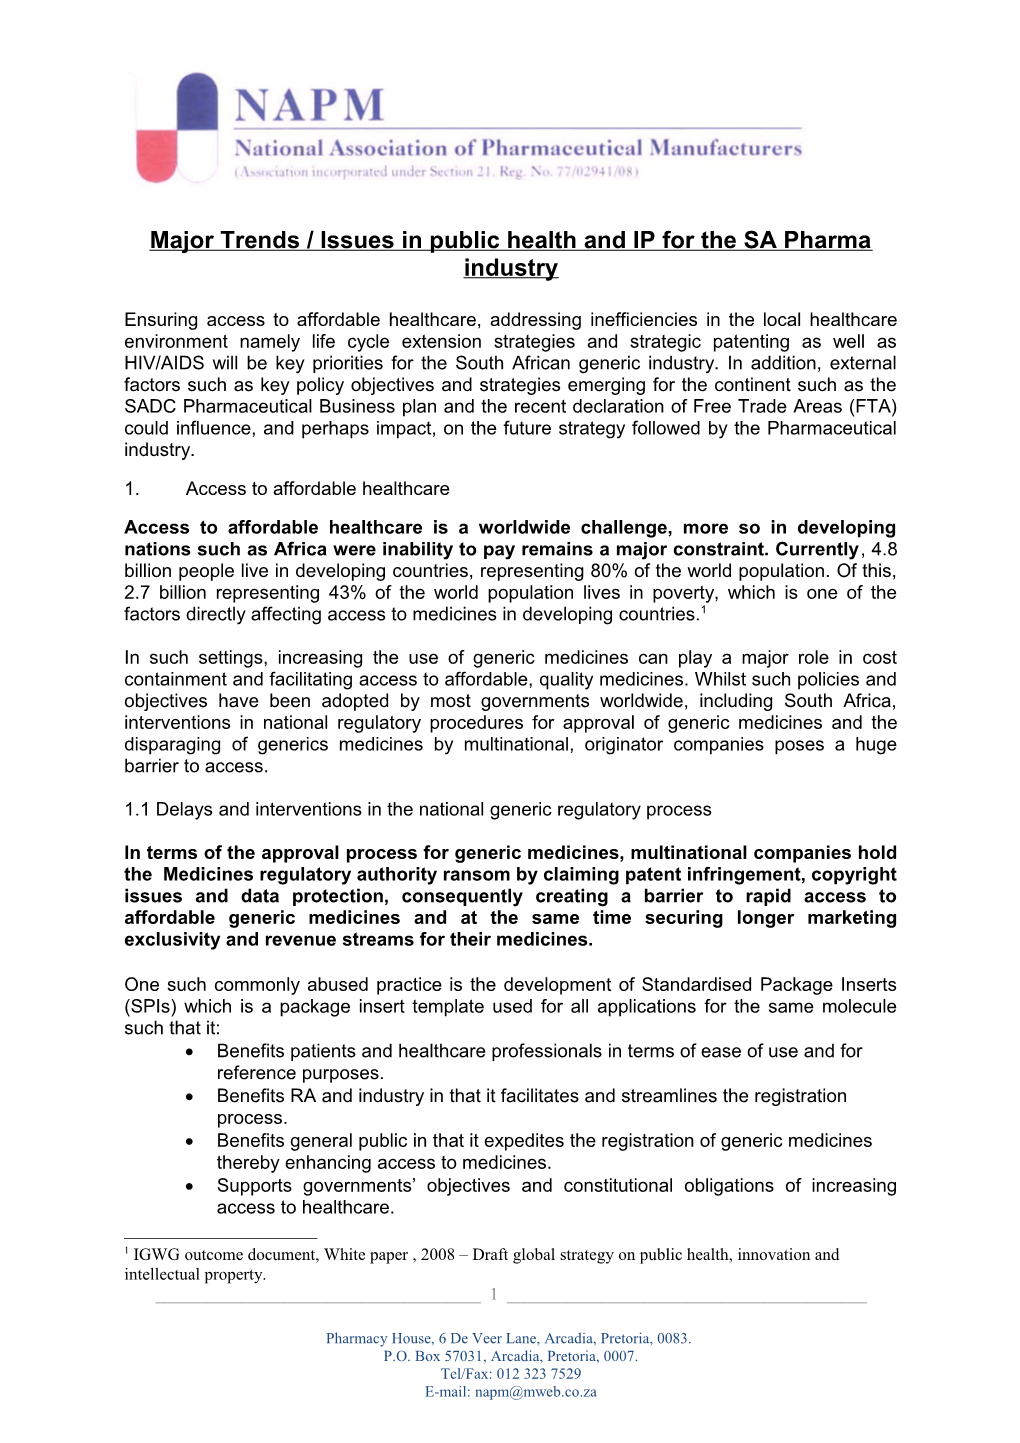 Major Trends / Issues in Public Health and IP for the SA Pharma Industry